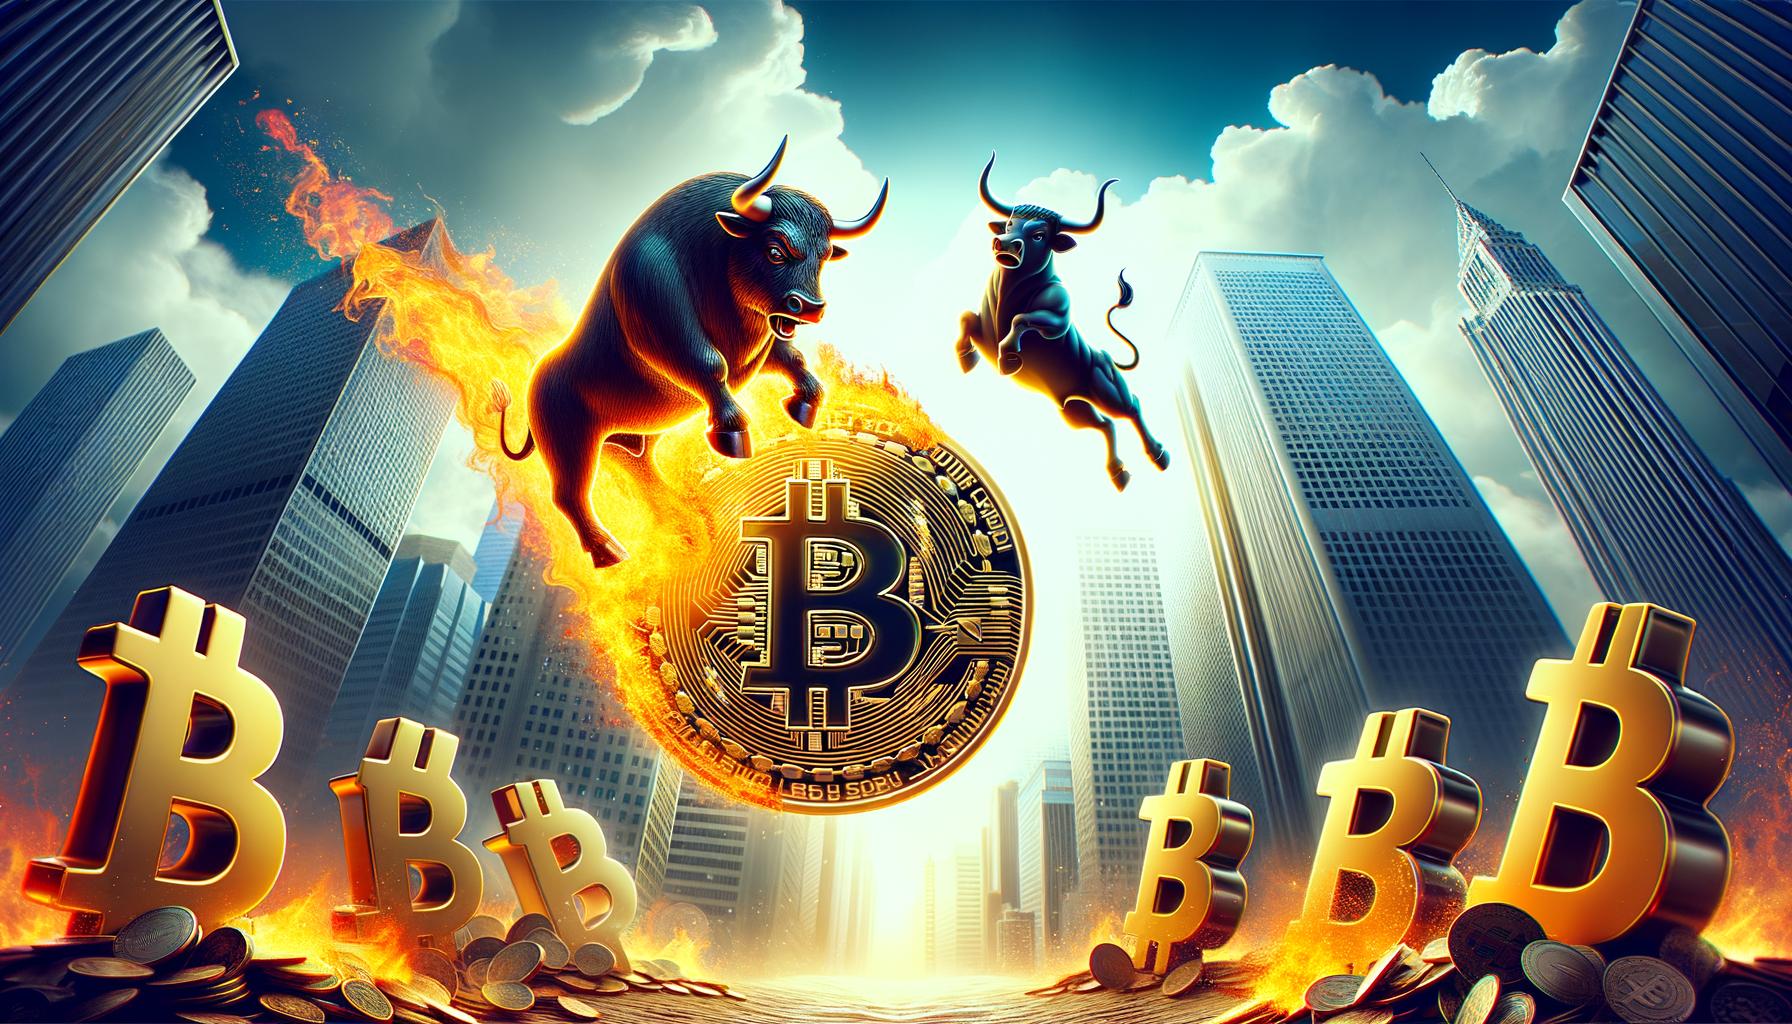 Bitcoin Price Takes a 5% Hit: Can Bulls Save The Week?